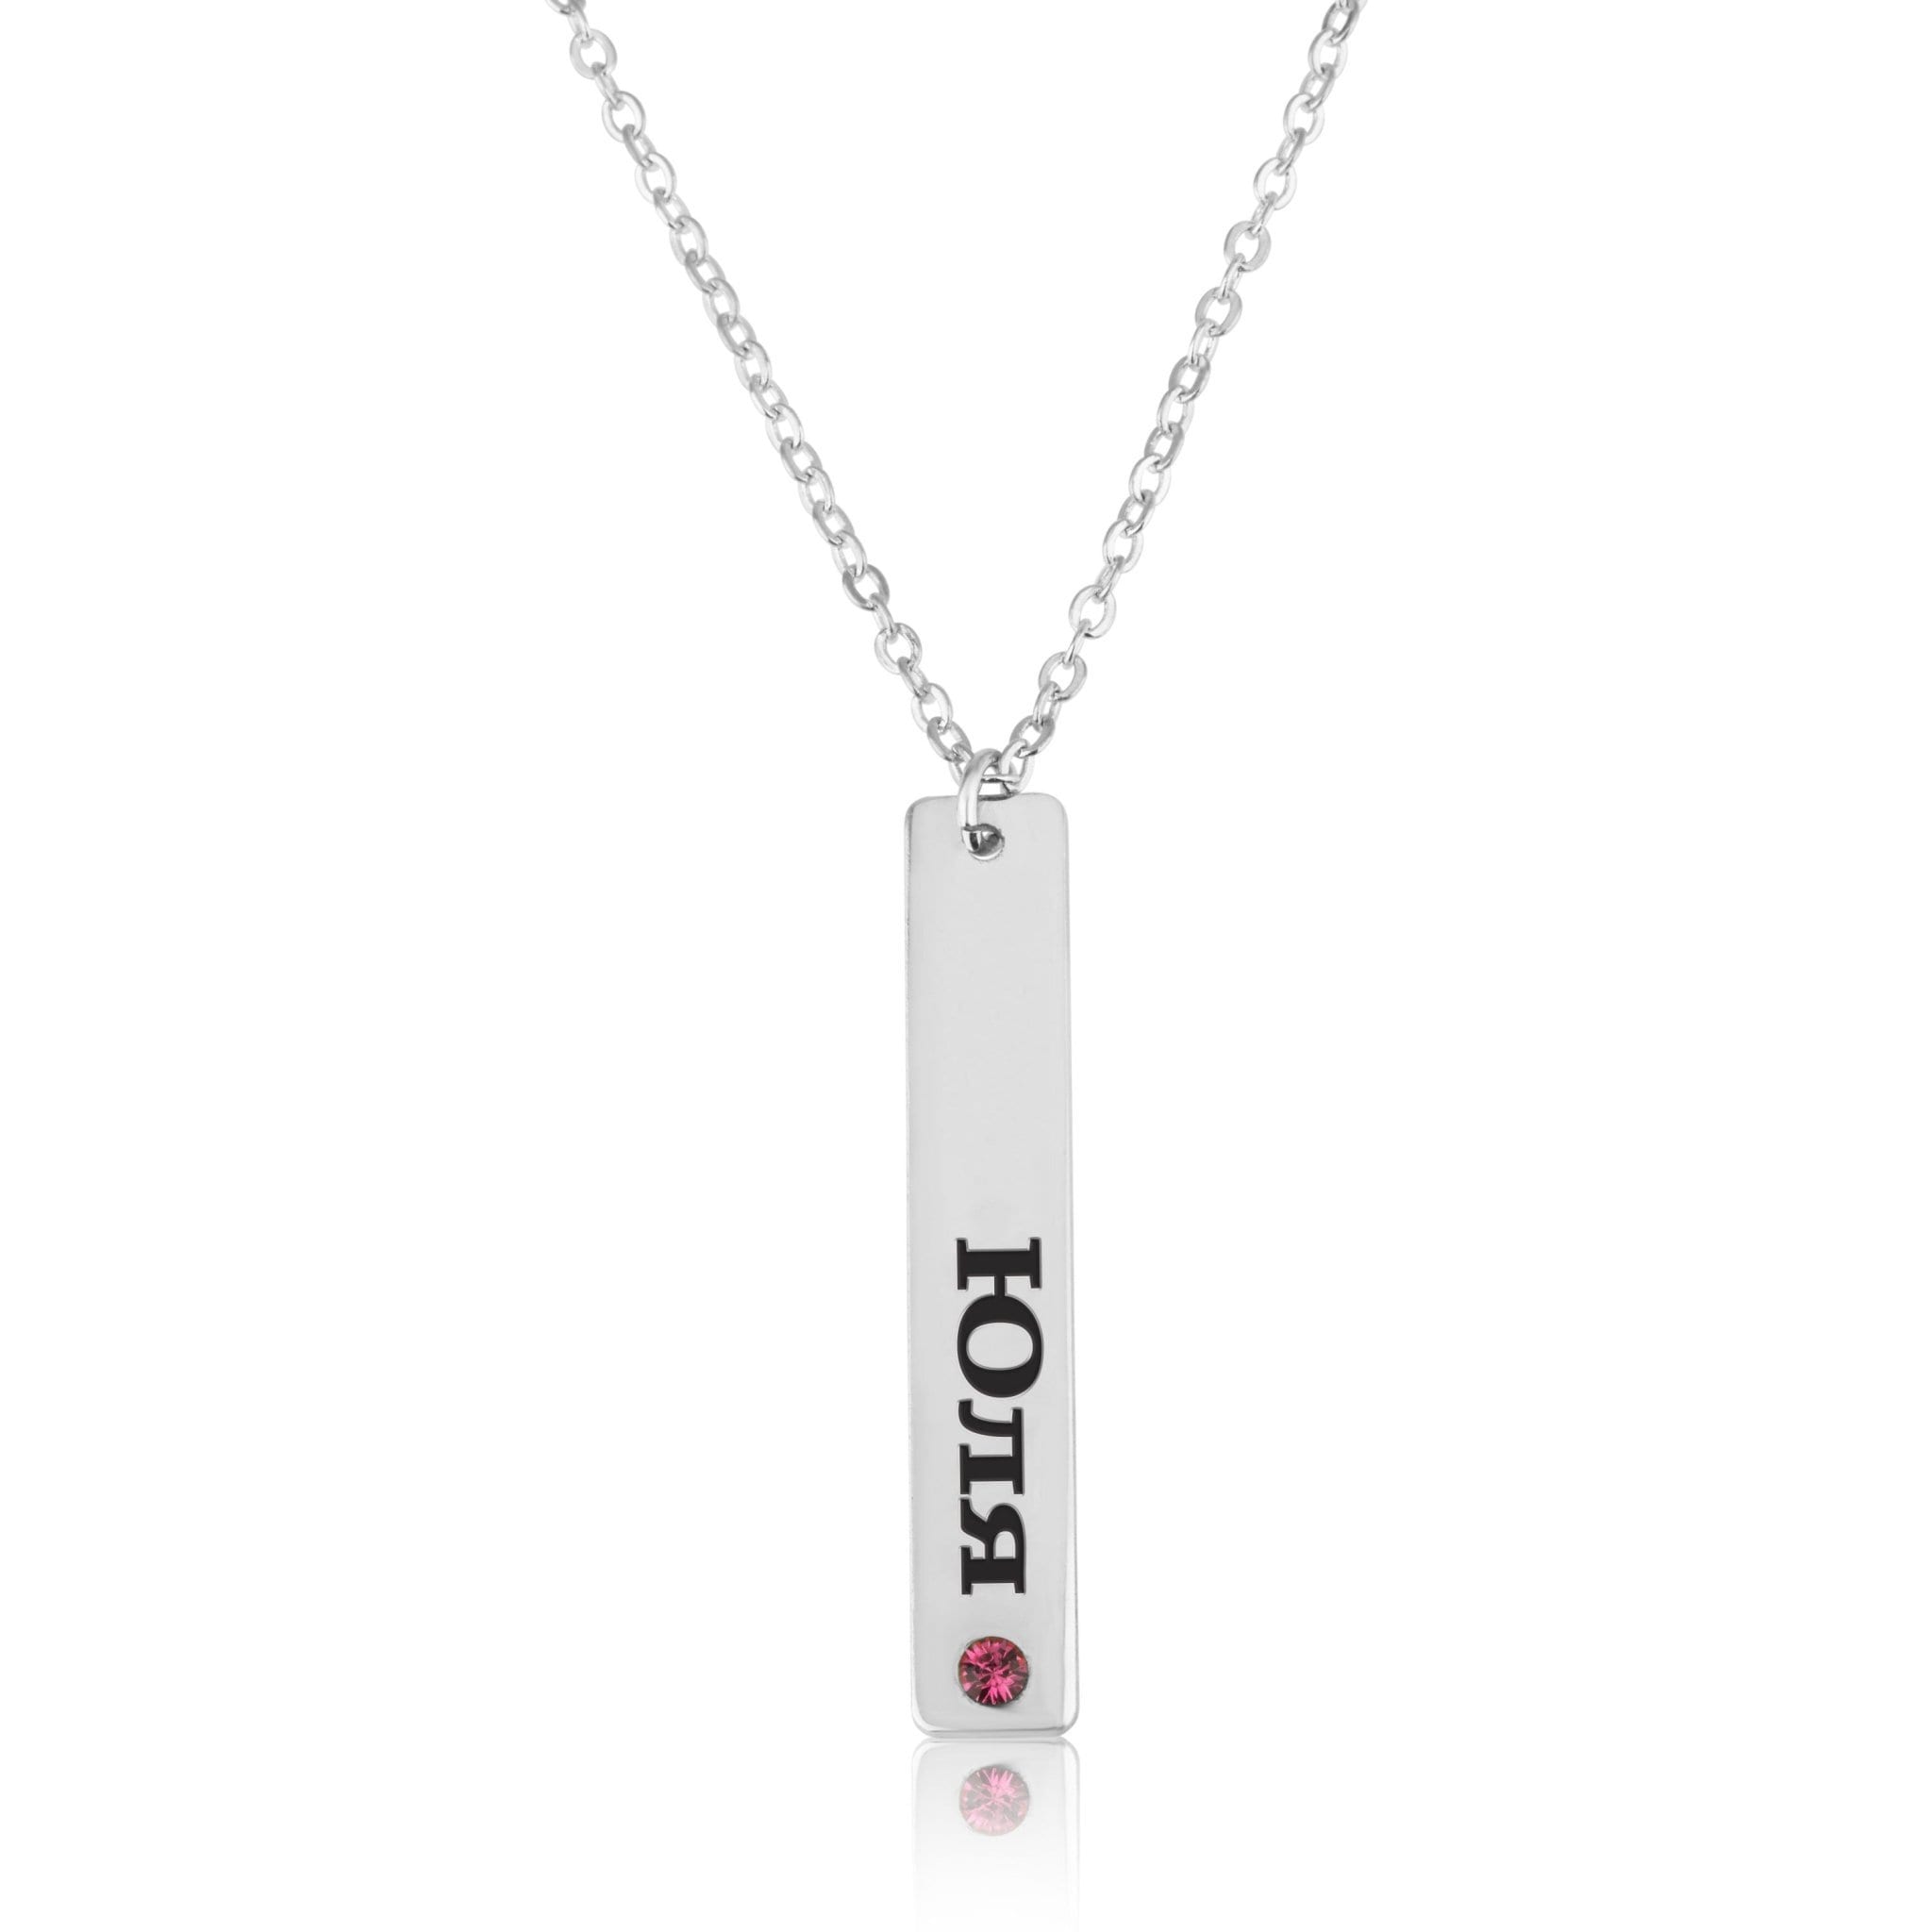 Russian Vertical Bar Necklace - Beleco Jewelry